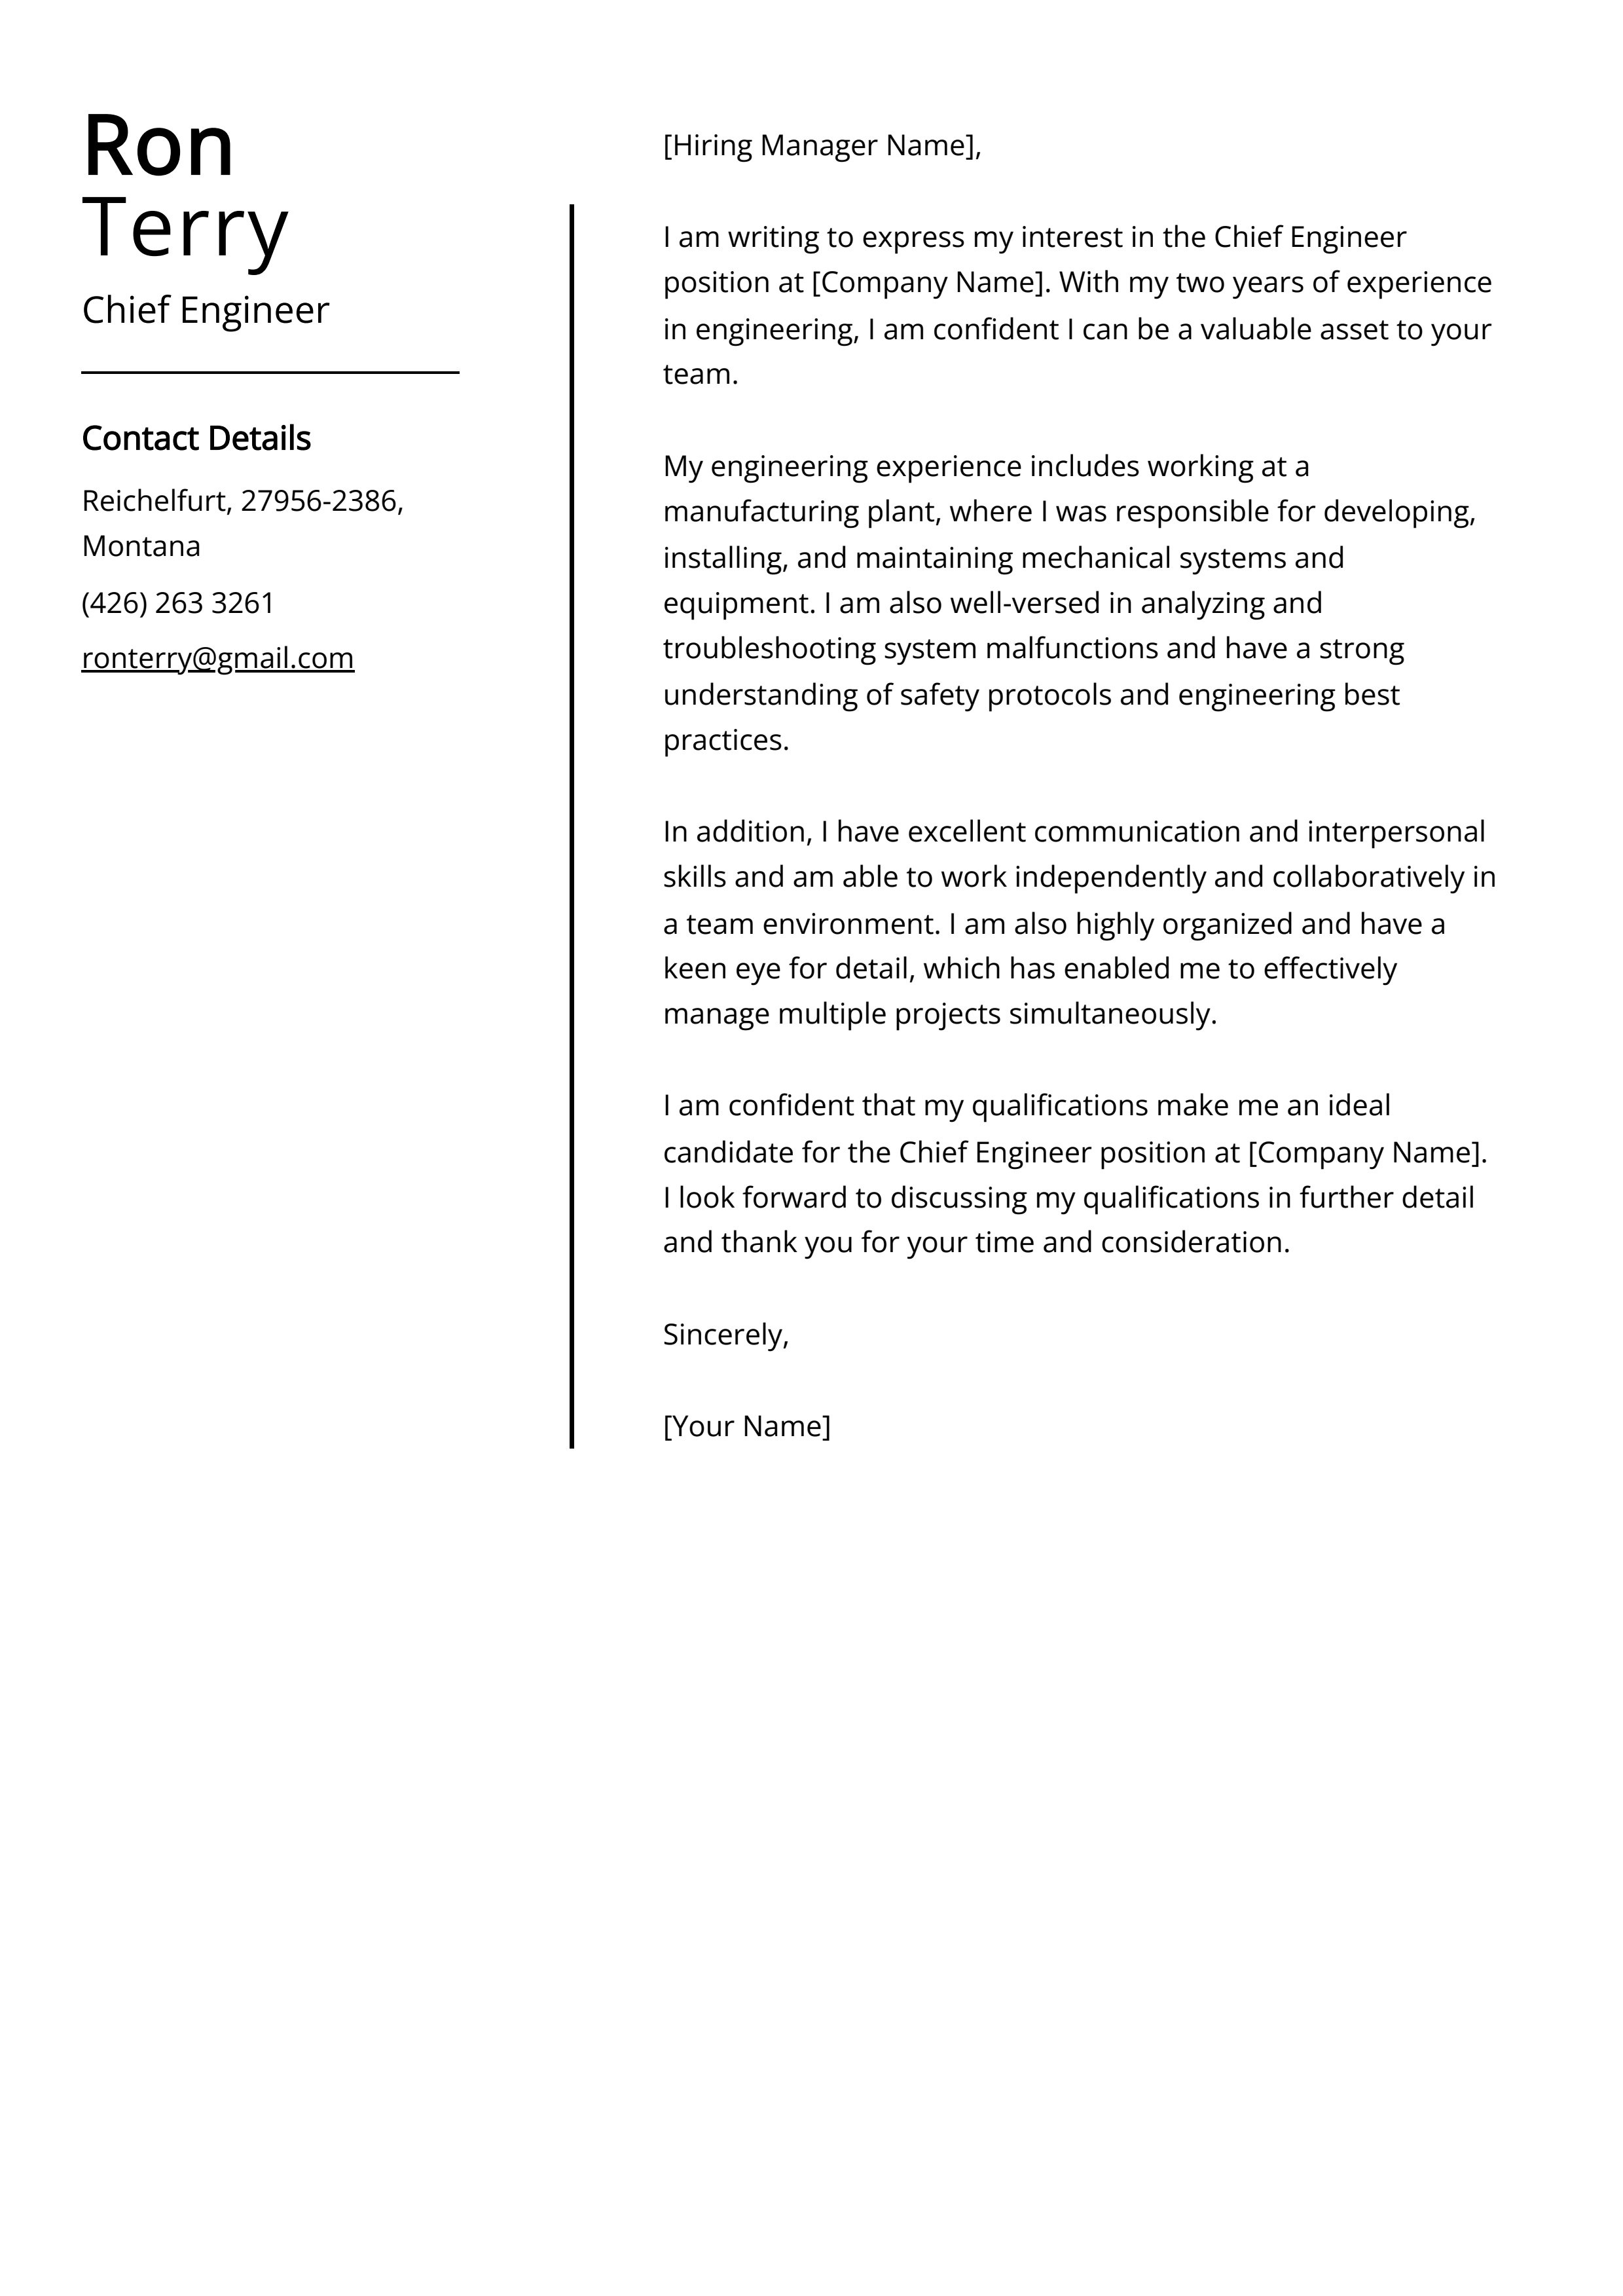 Chief Engineer Cover Letter Example